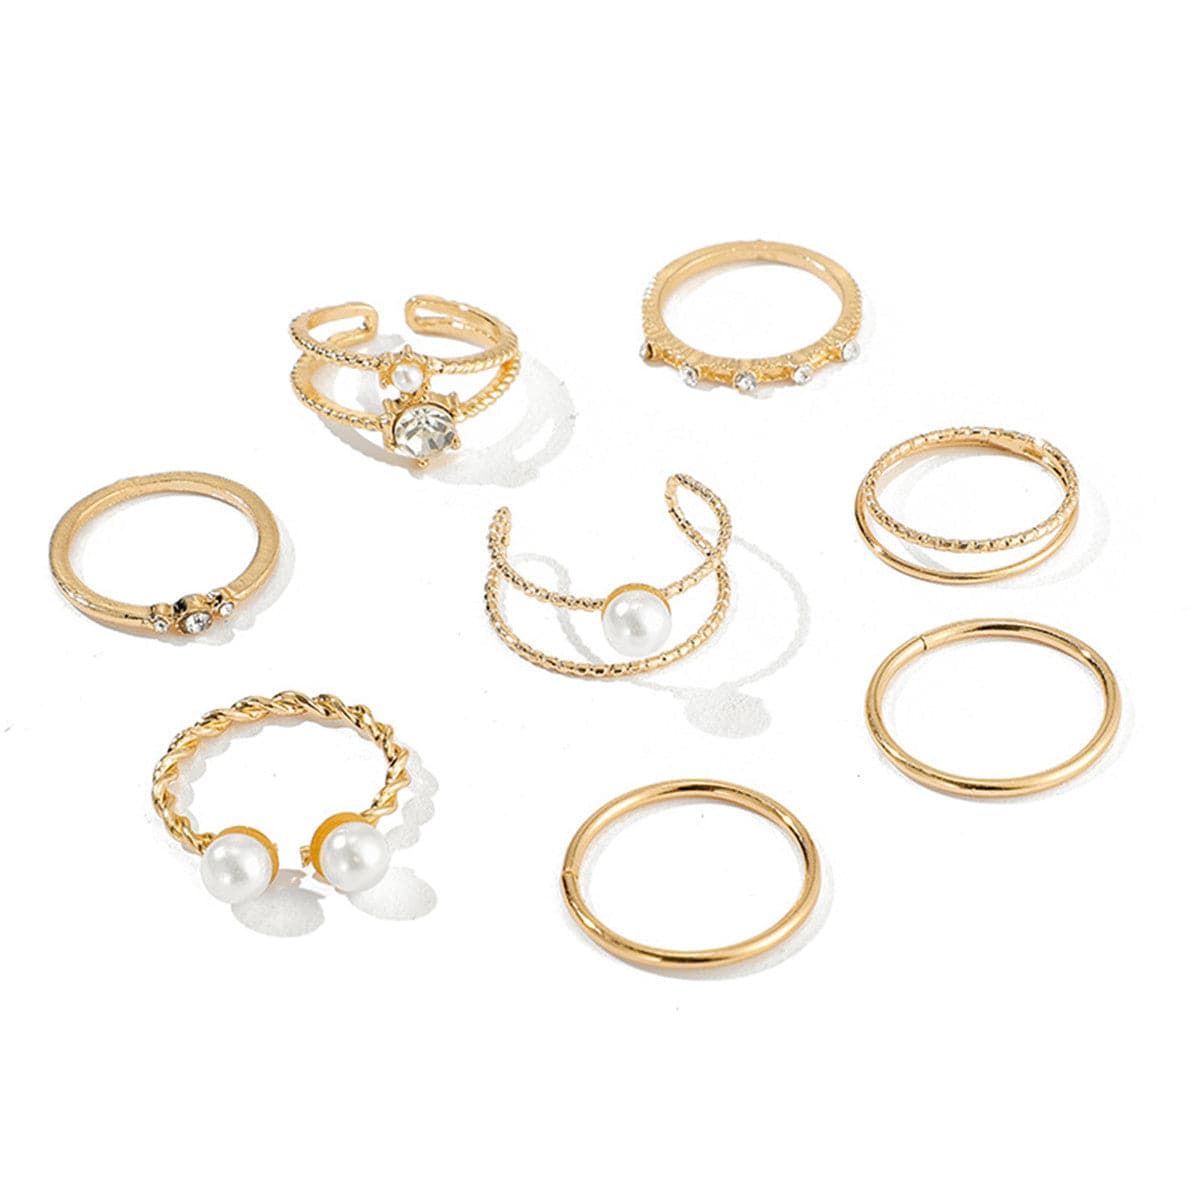 Cubic Zirconia & Pearl 18K Gold-Plated Braided-Band Ring Set